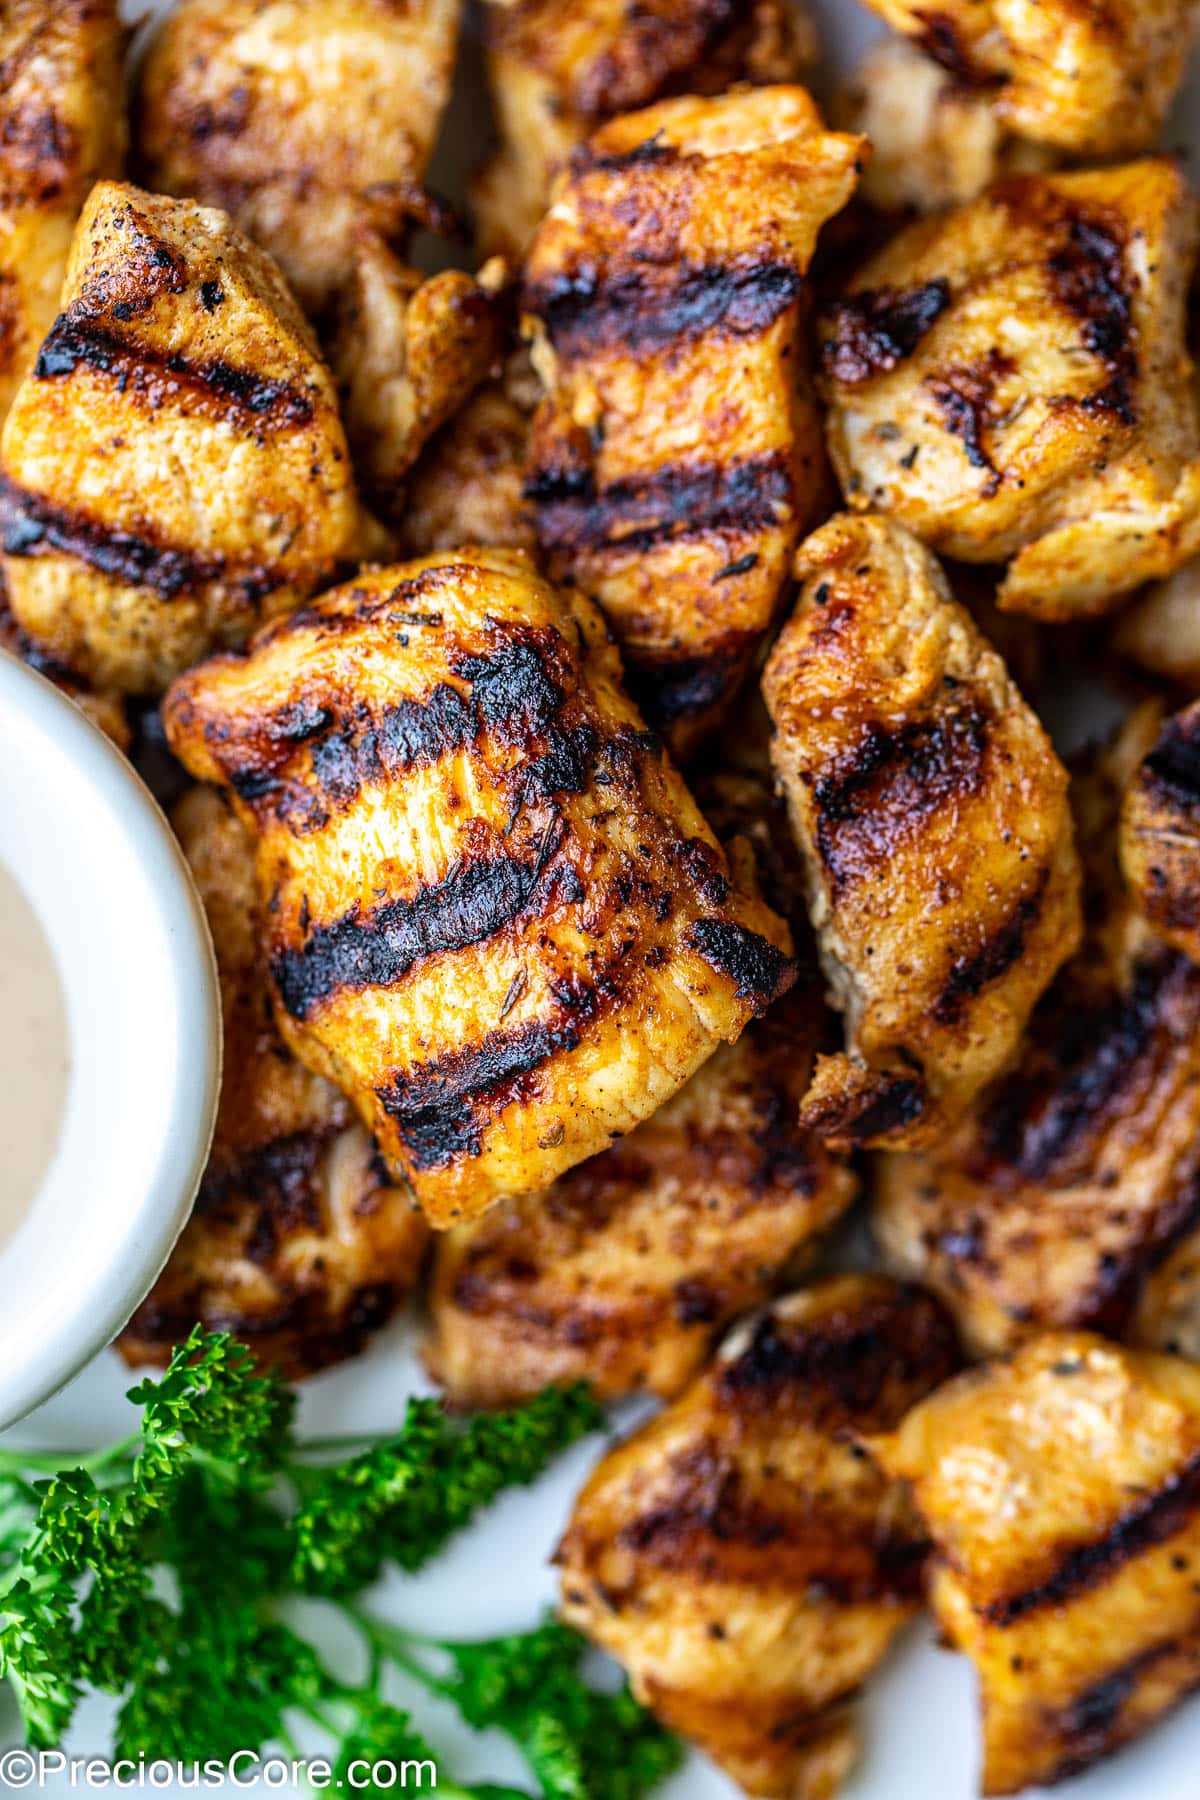 Close up shot of grilled chicken bites with grill marks.